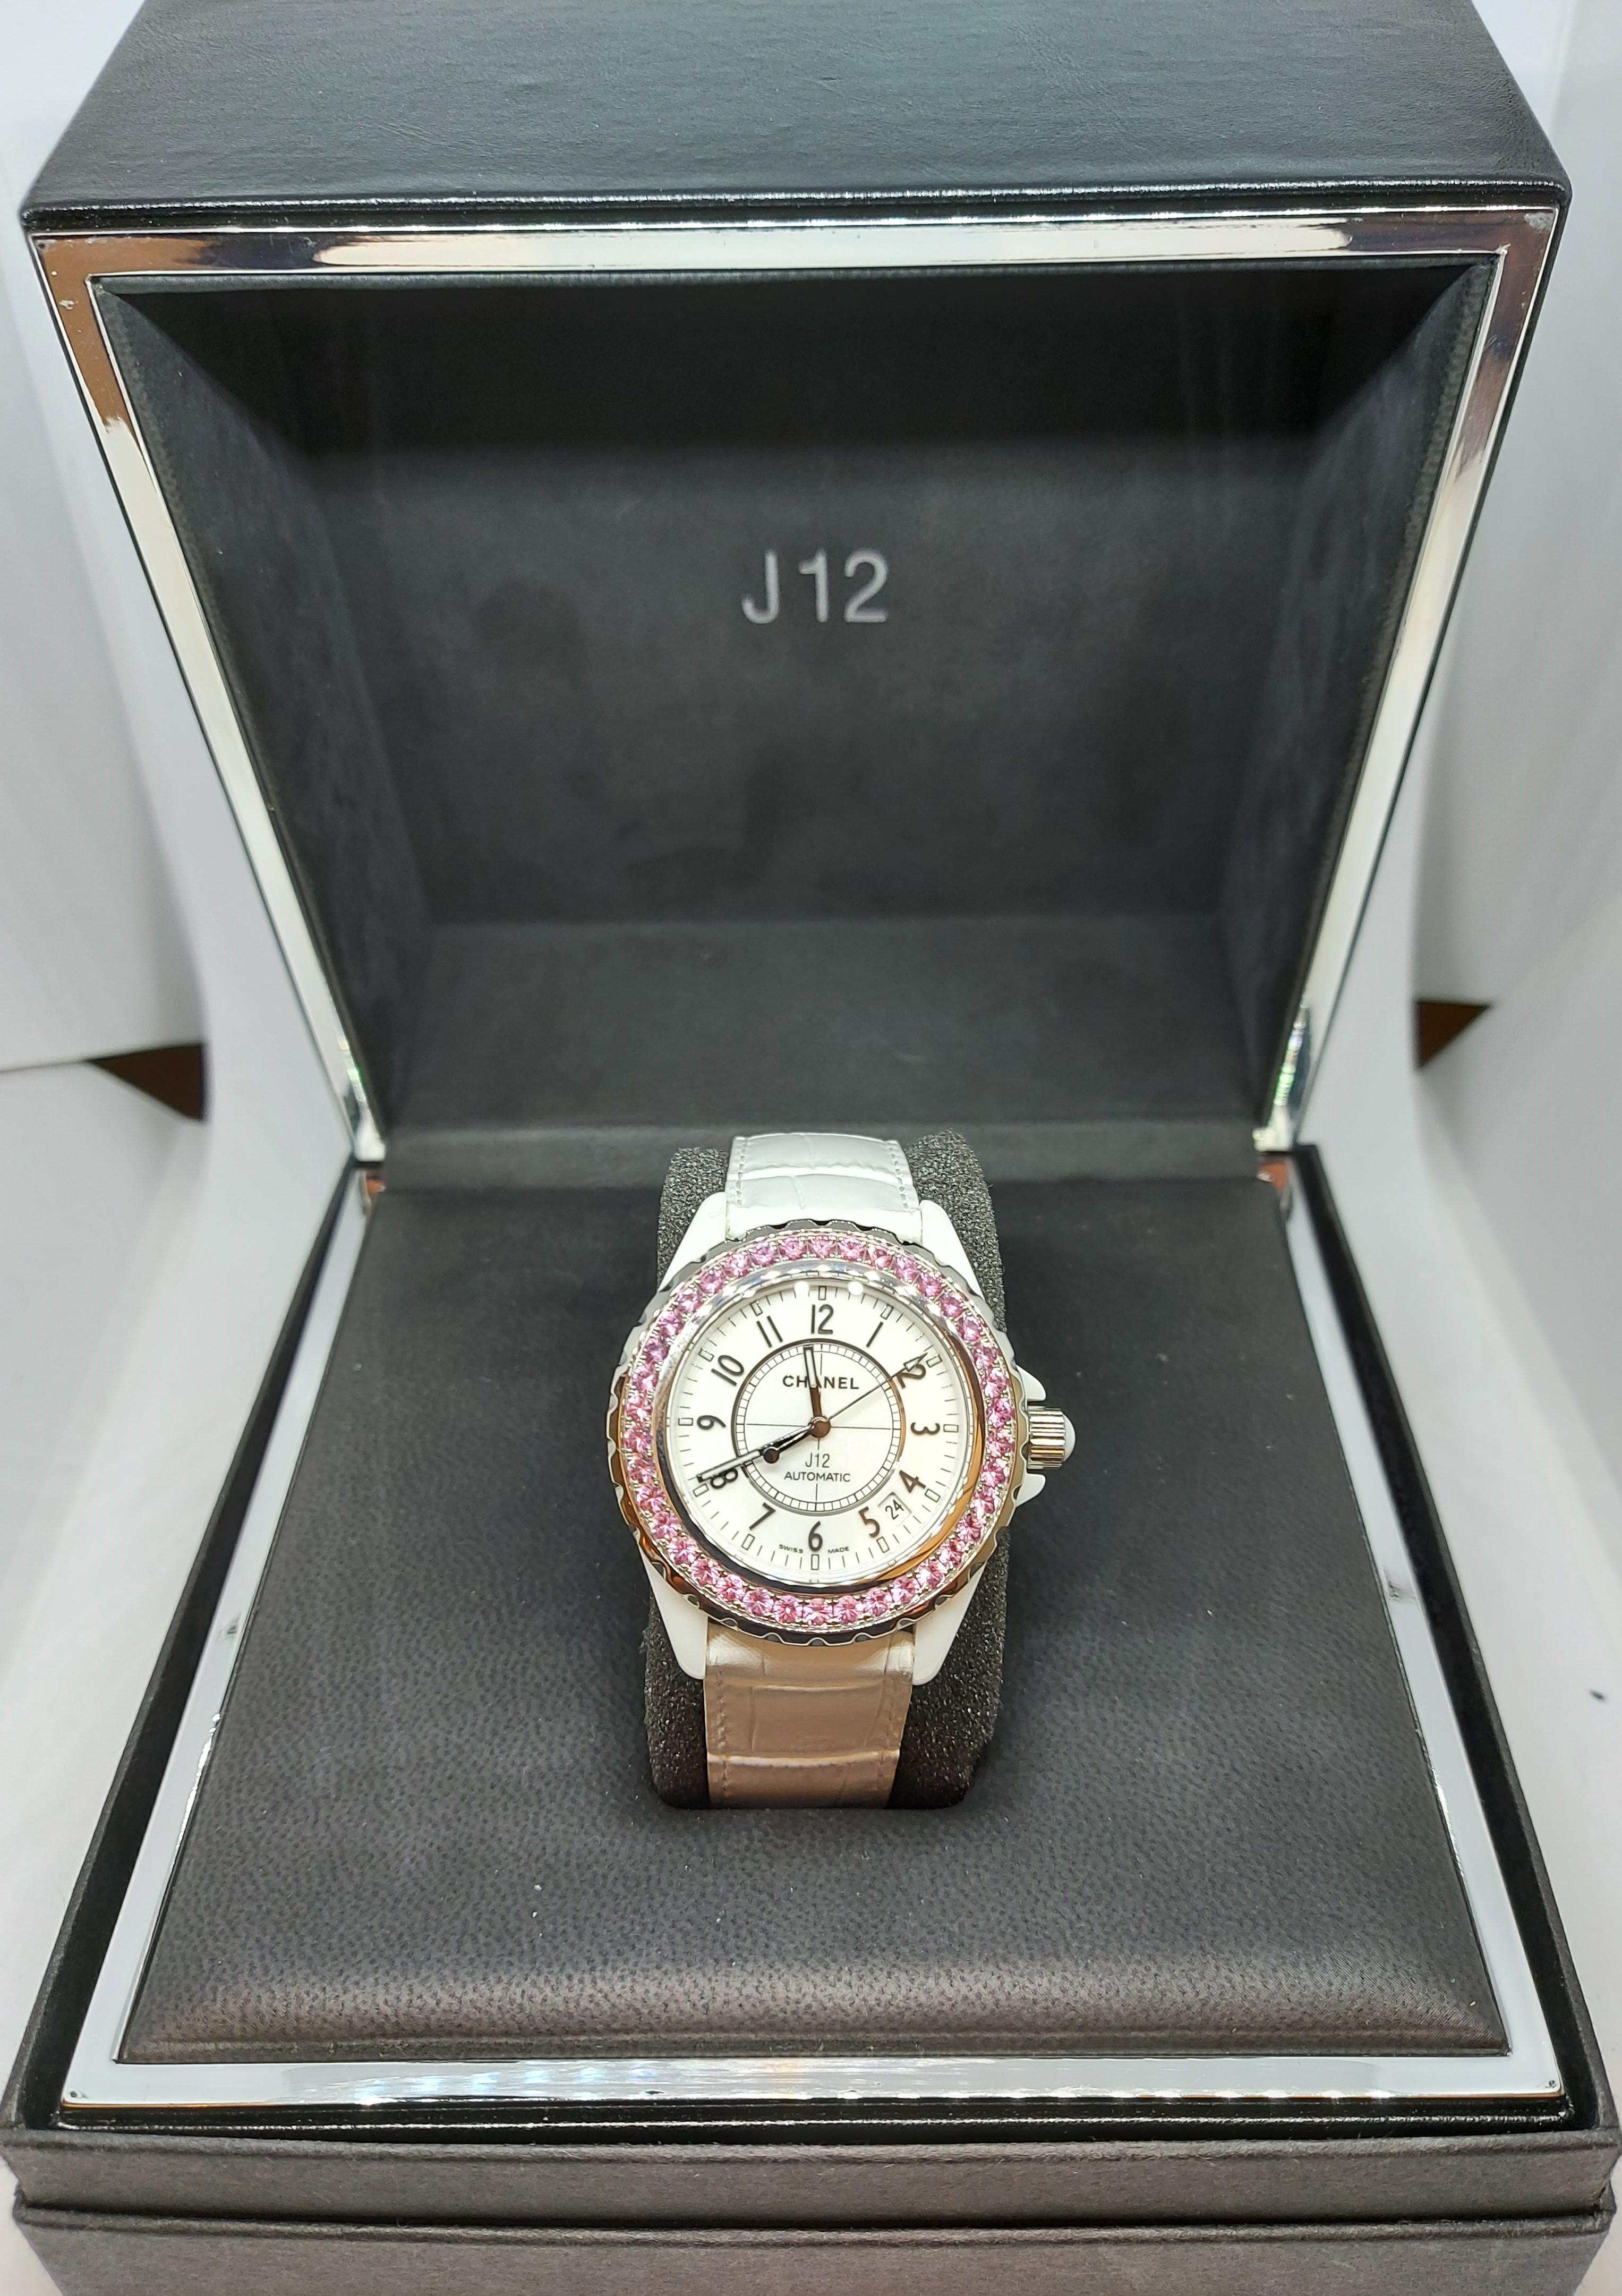 Chanel J12, Automatic, Ceramic Case, with Pink Sapphires 10